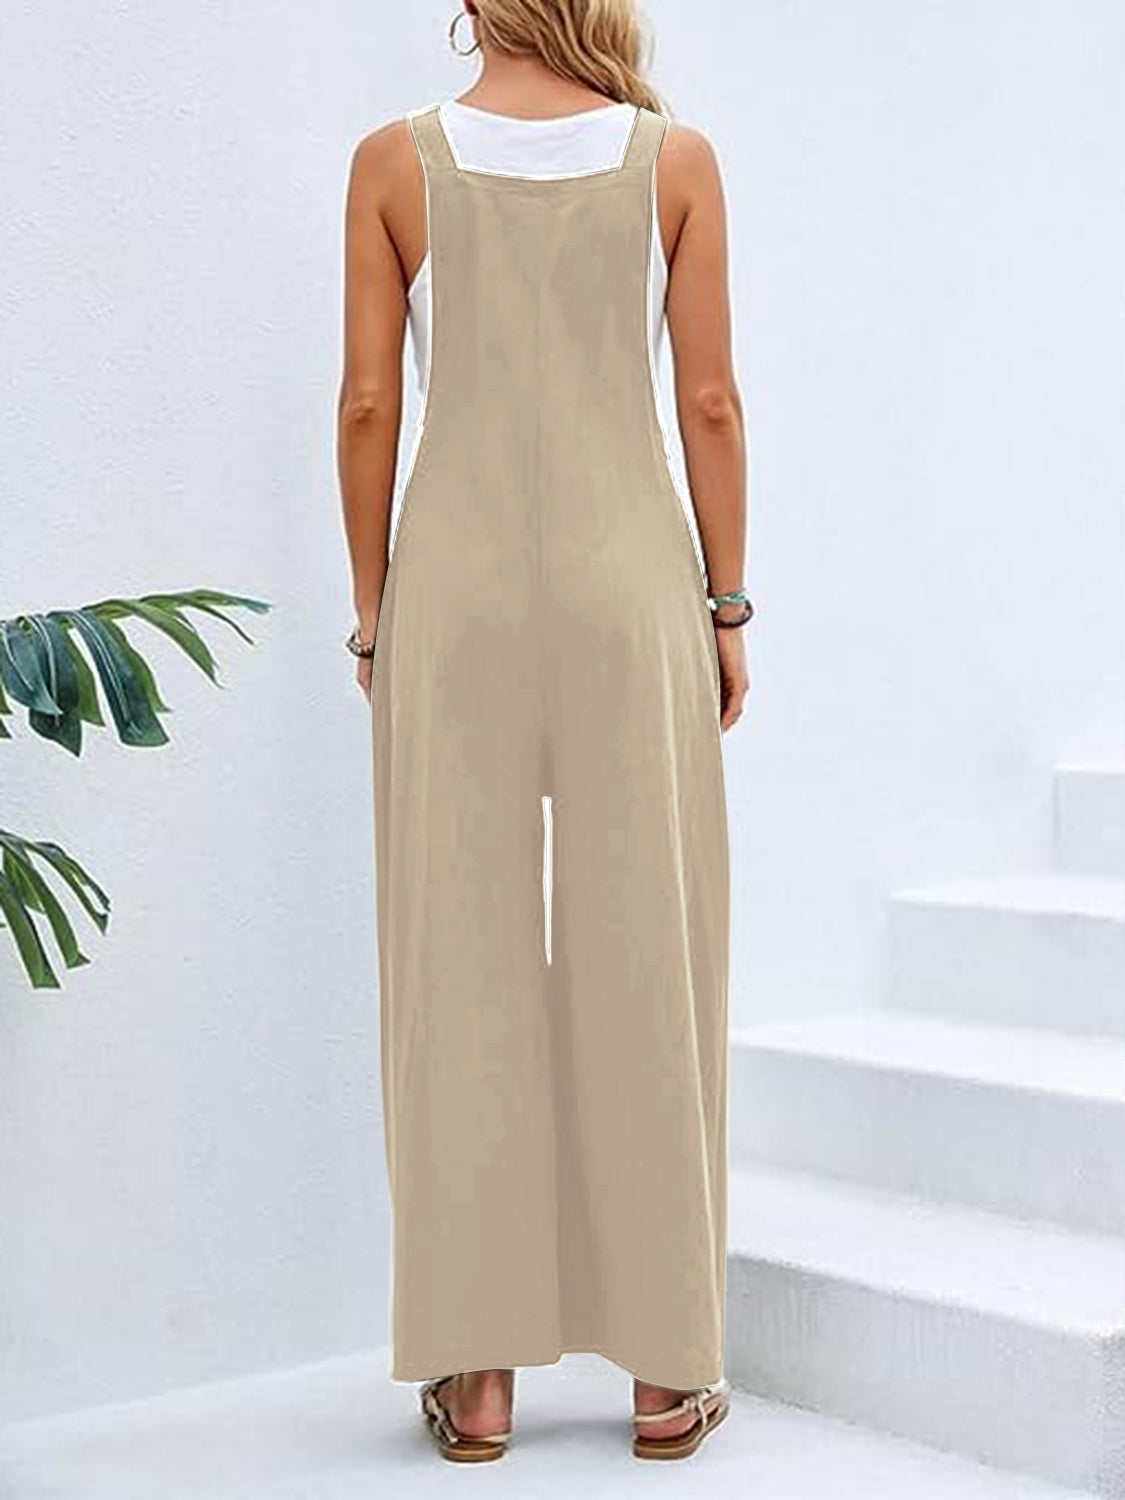 Wide Leg Overalls with Pockets - Bottoms - Overalls - 17 - 2024